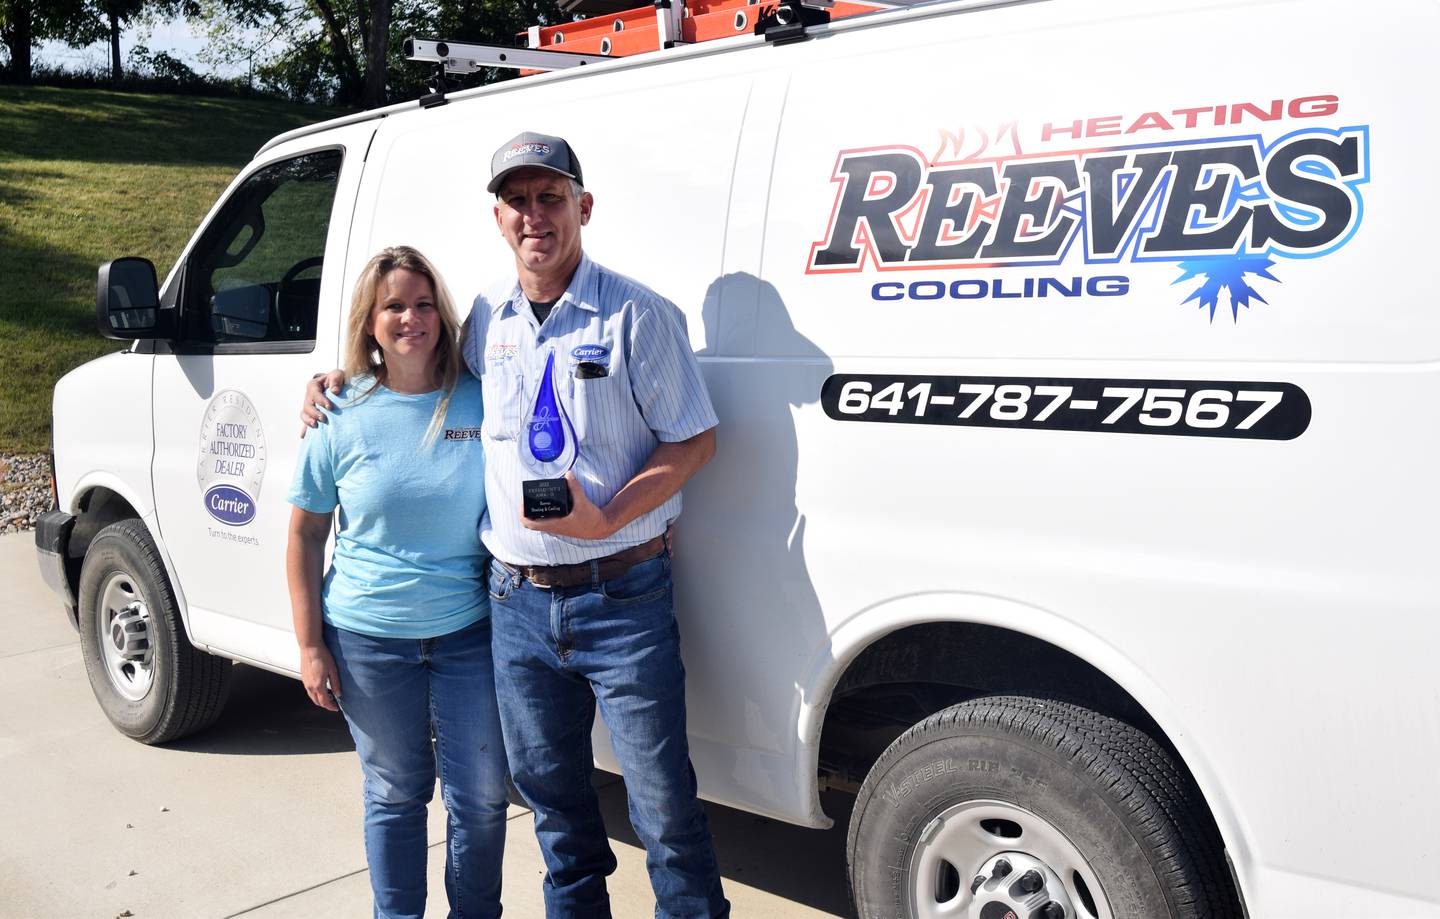 From left: Kristen Reeves and Jack Reeves of Reeves Heating & Cooling pose with company's Carrier President's Award, a prestigious honor given to the best of the best Carrier dealers.